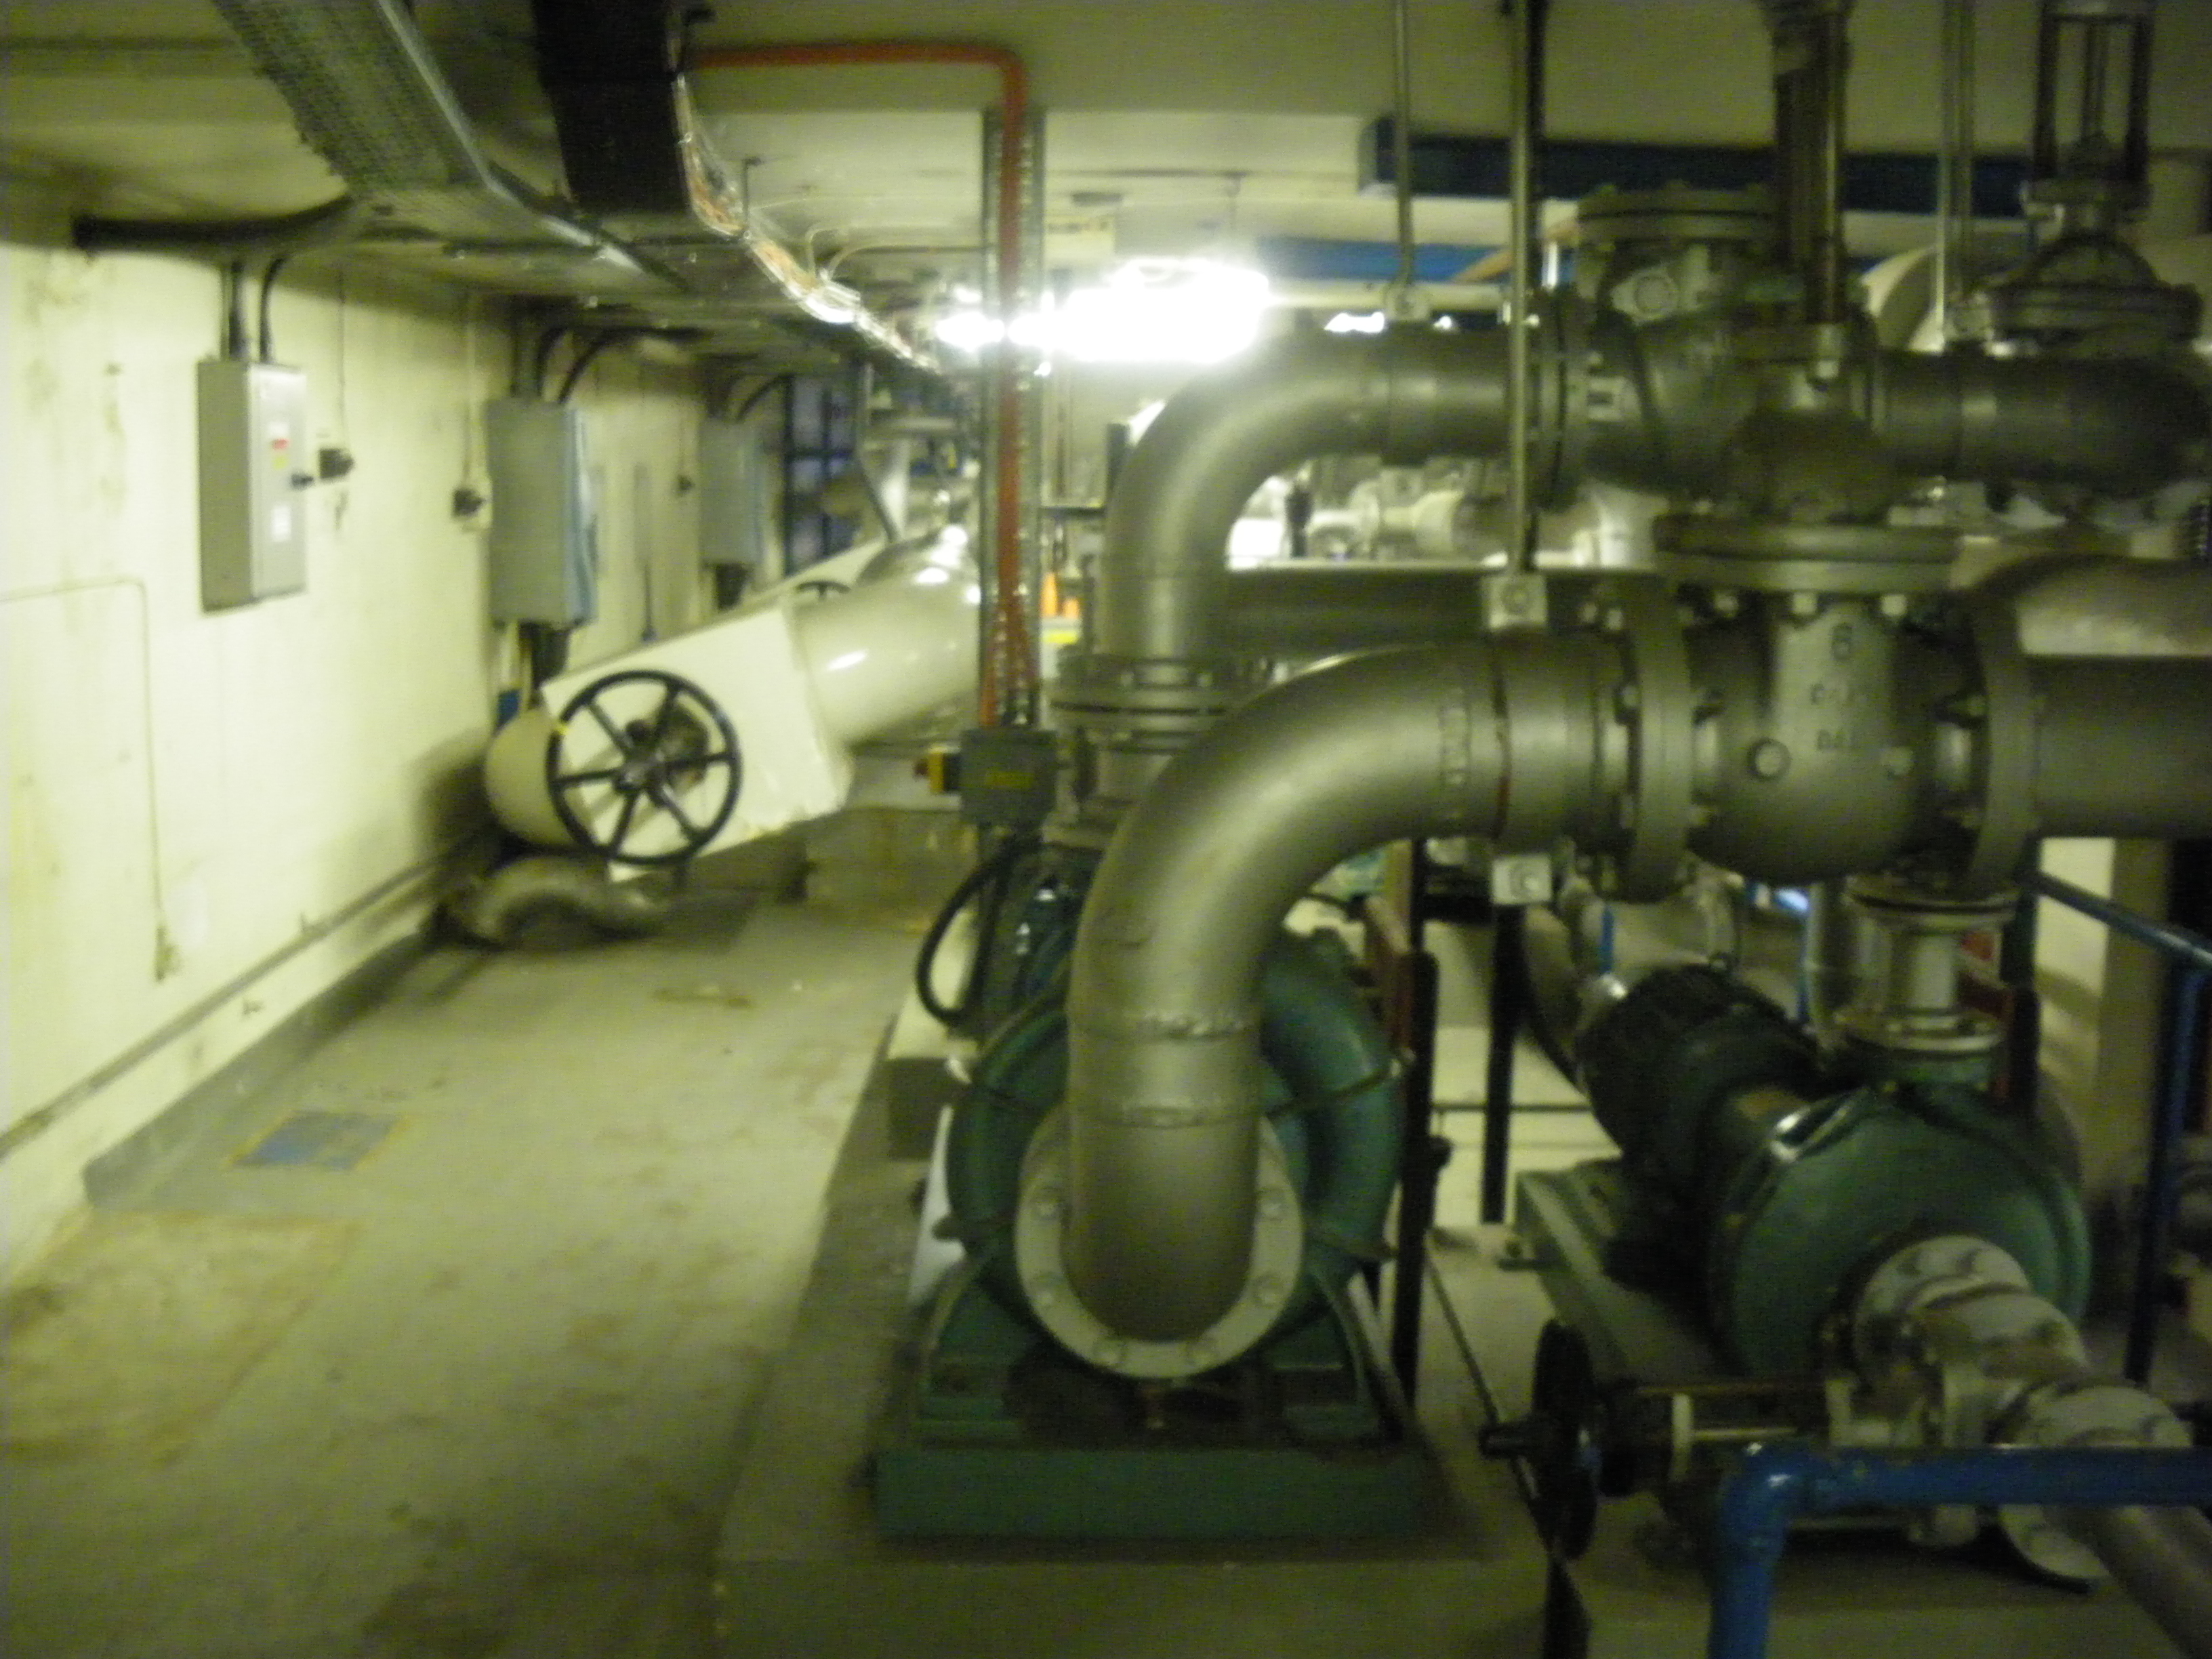 Chilled water and condensate pumps/pipes in the Refrigeration Plant